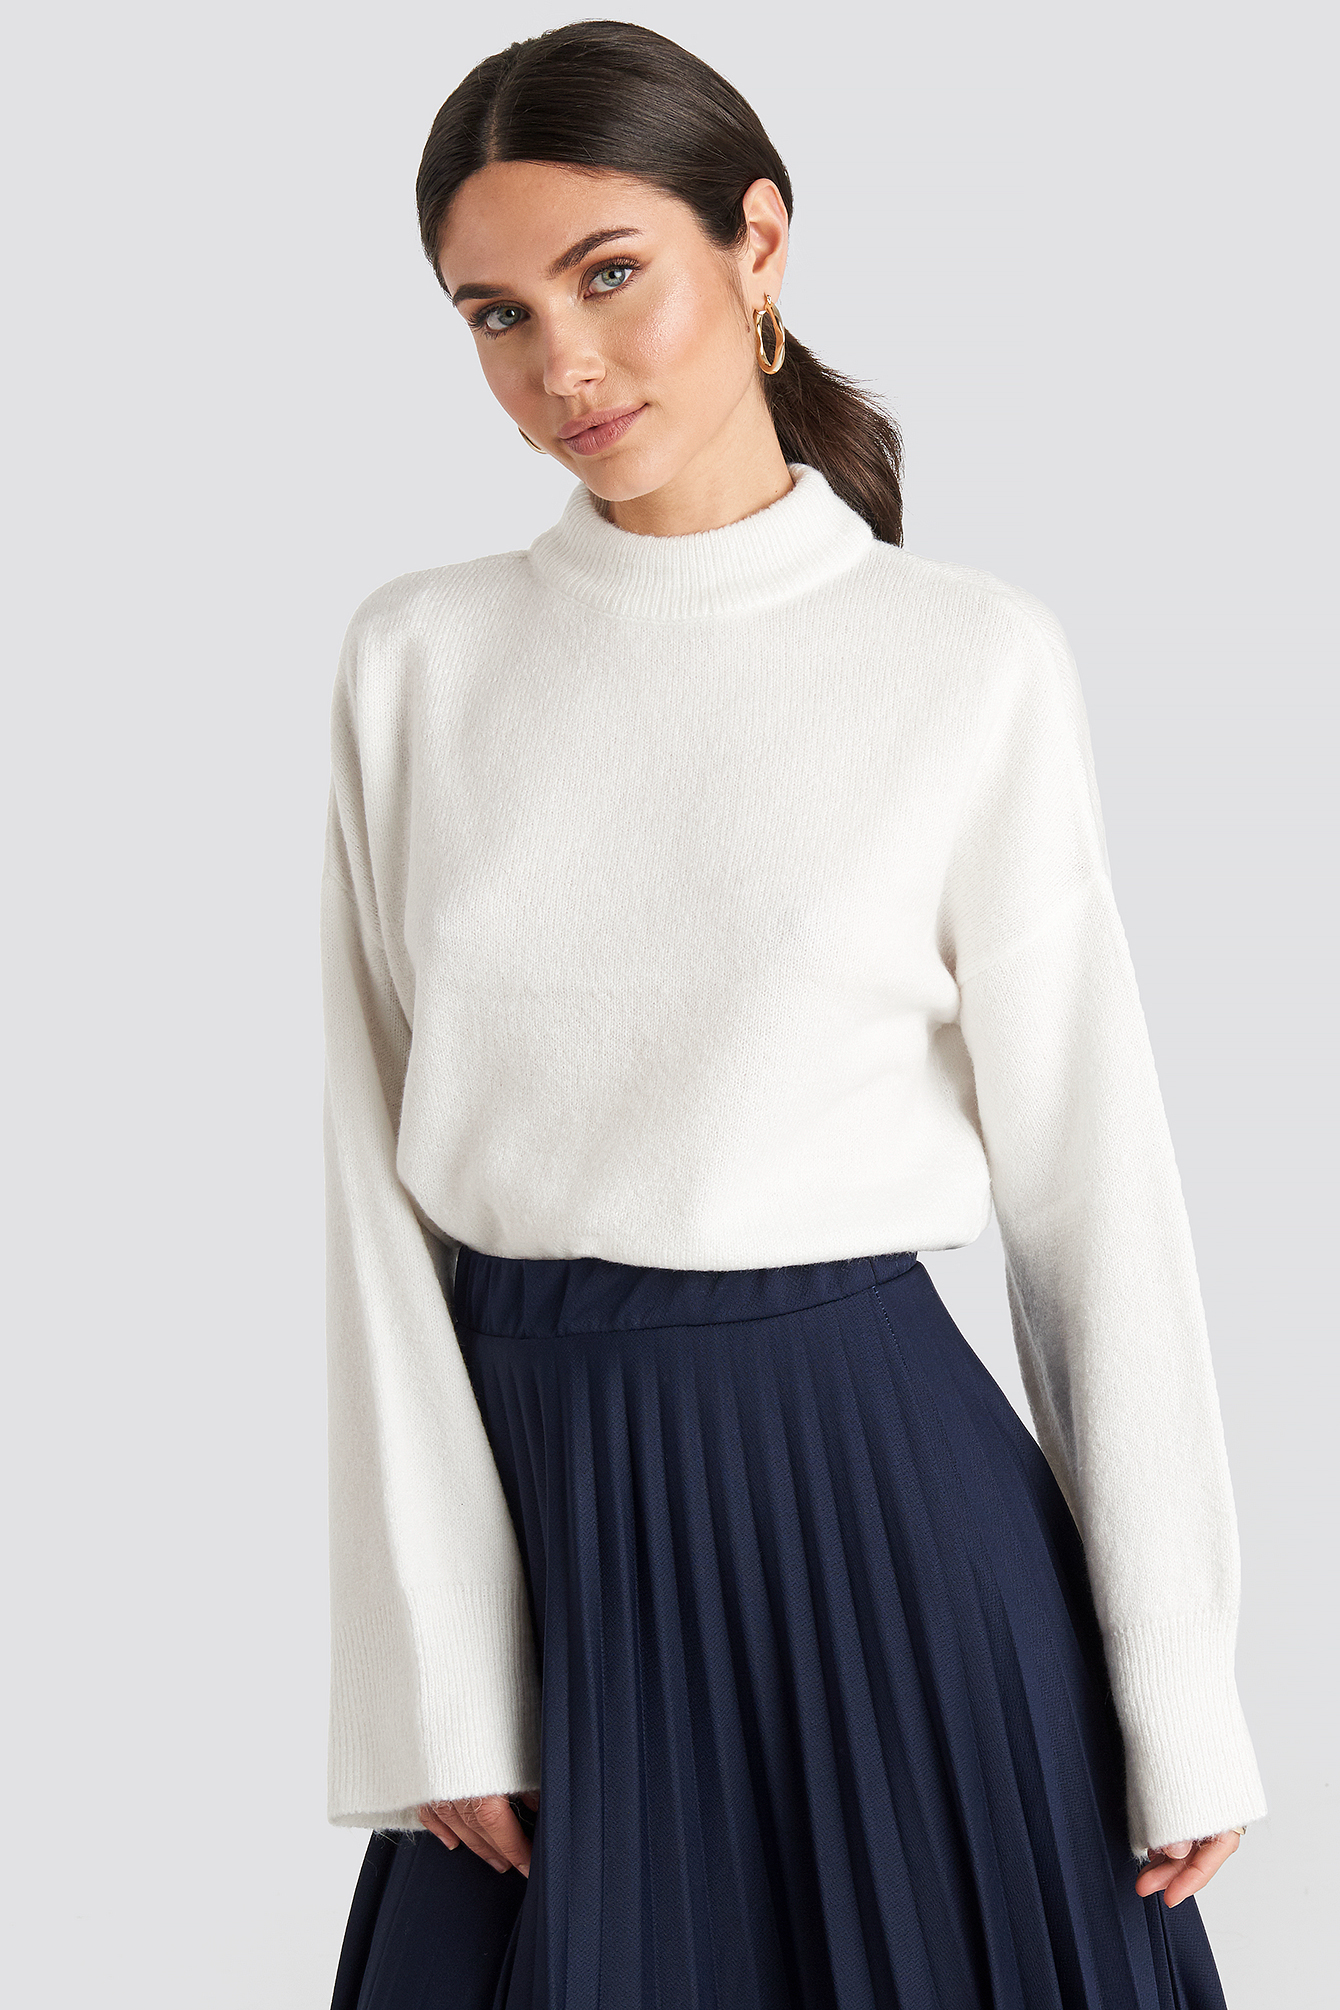 Offwhite Wide Sleeve Round Neck Knitted Sweater